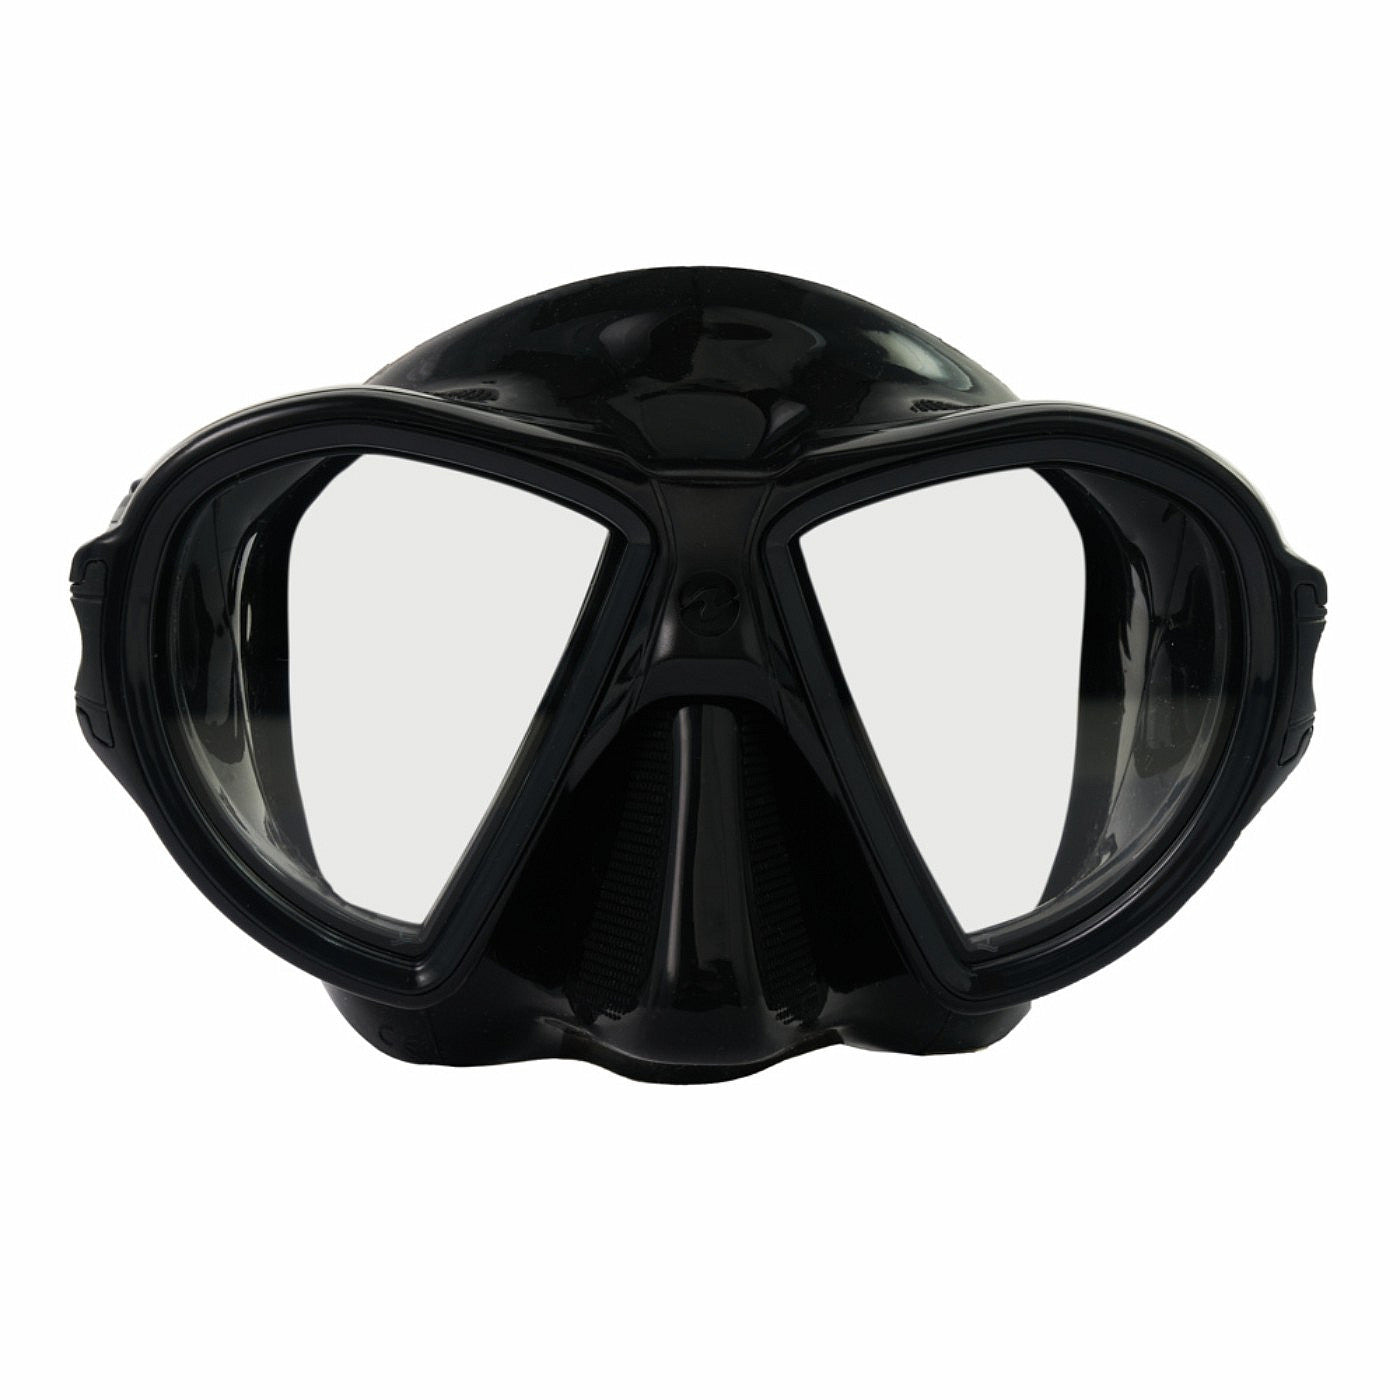 Aqualung Micromask X Diving Mask Black